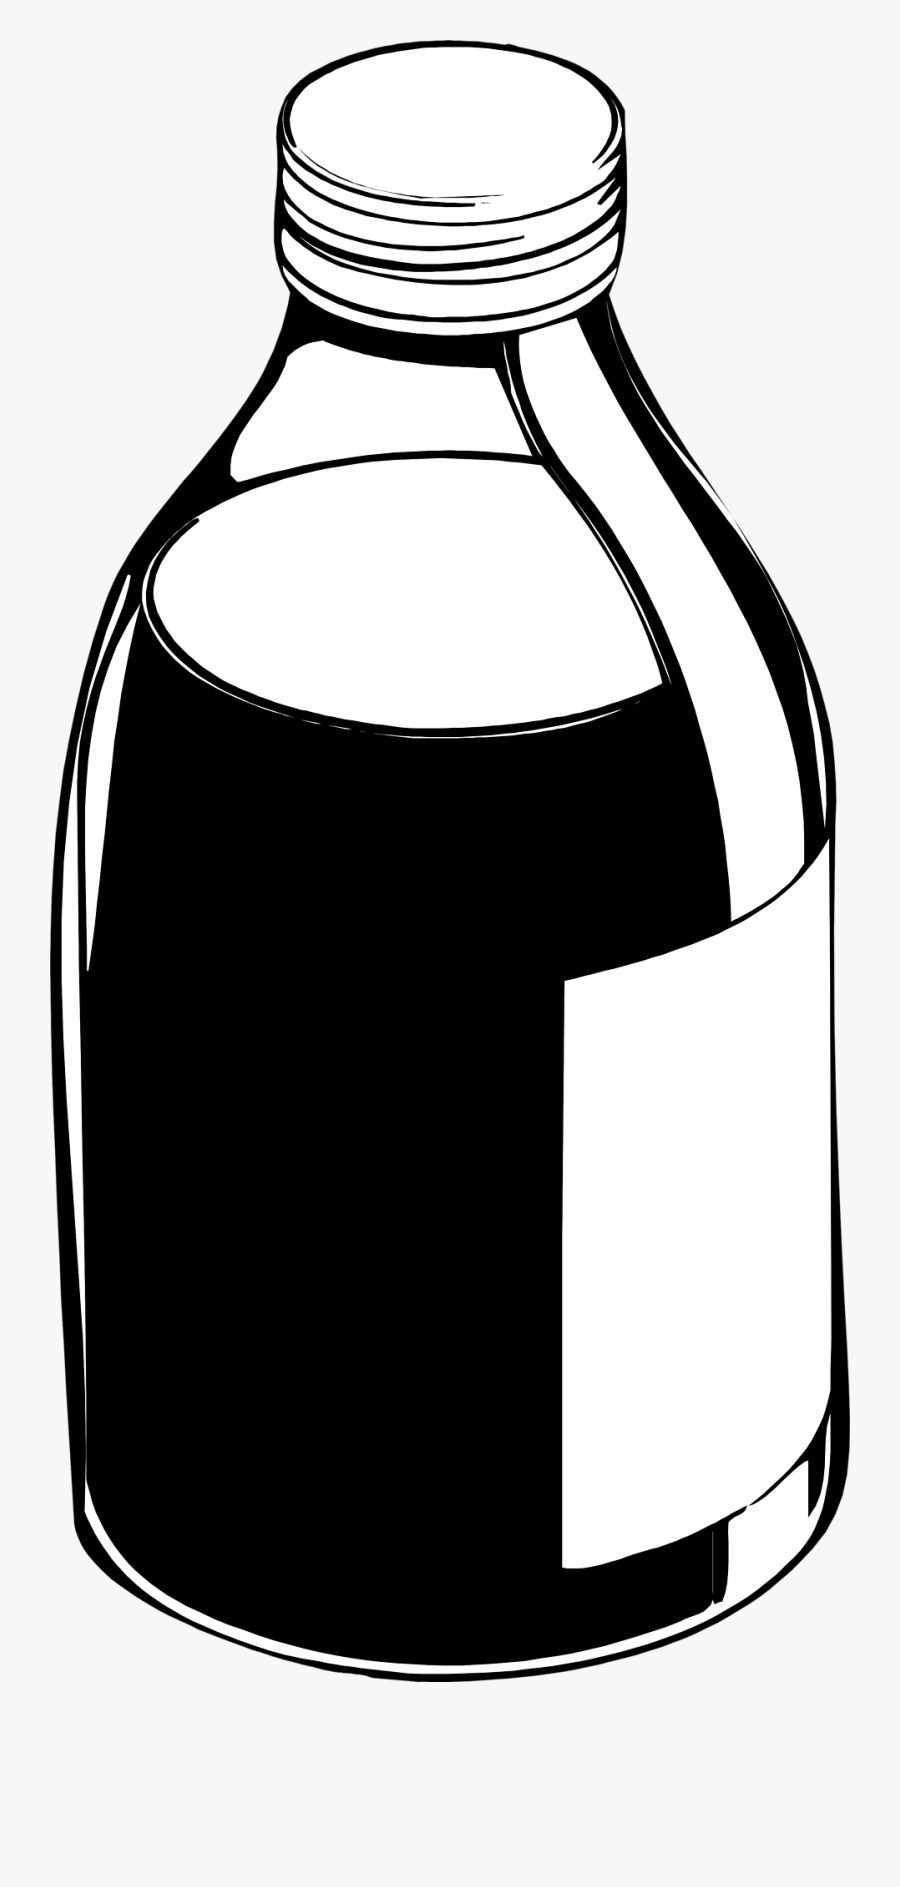 Medicine Bottle Clipart - Medicine Bottle Clipart Black And White, Transparent Clipart